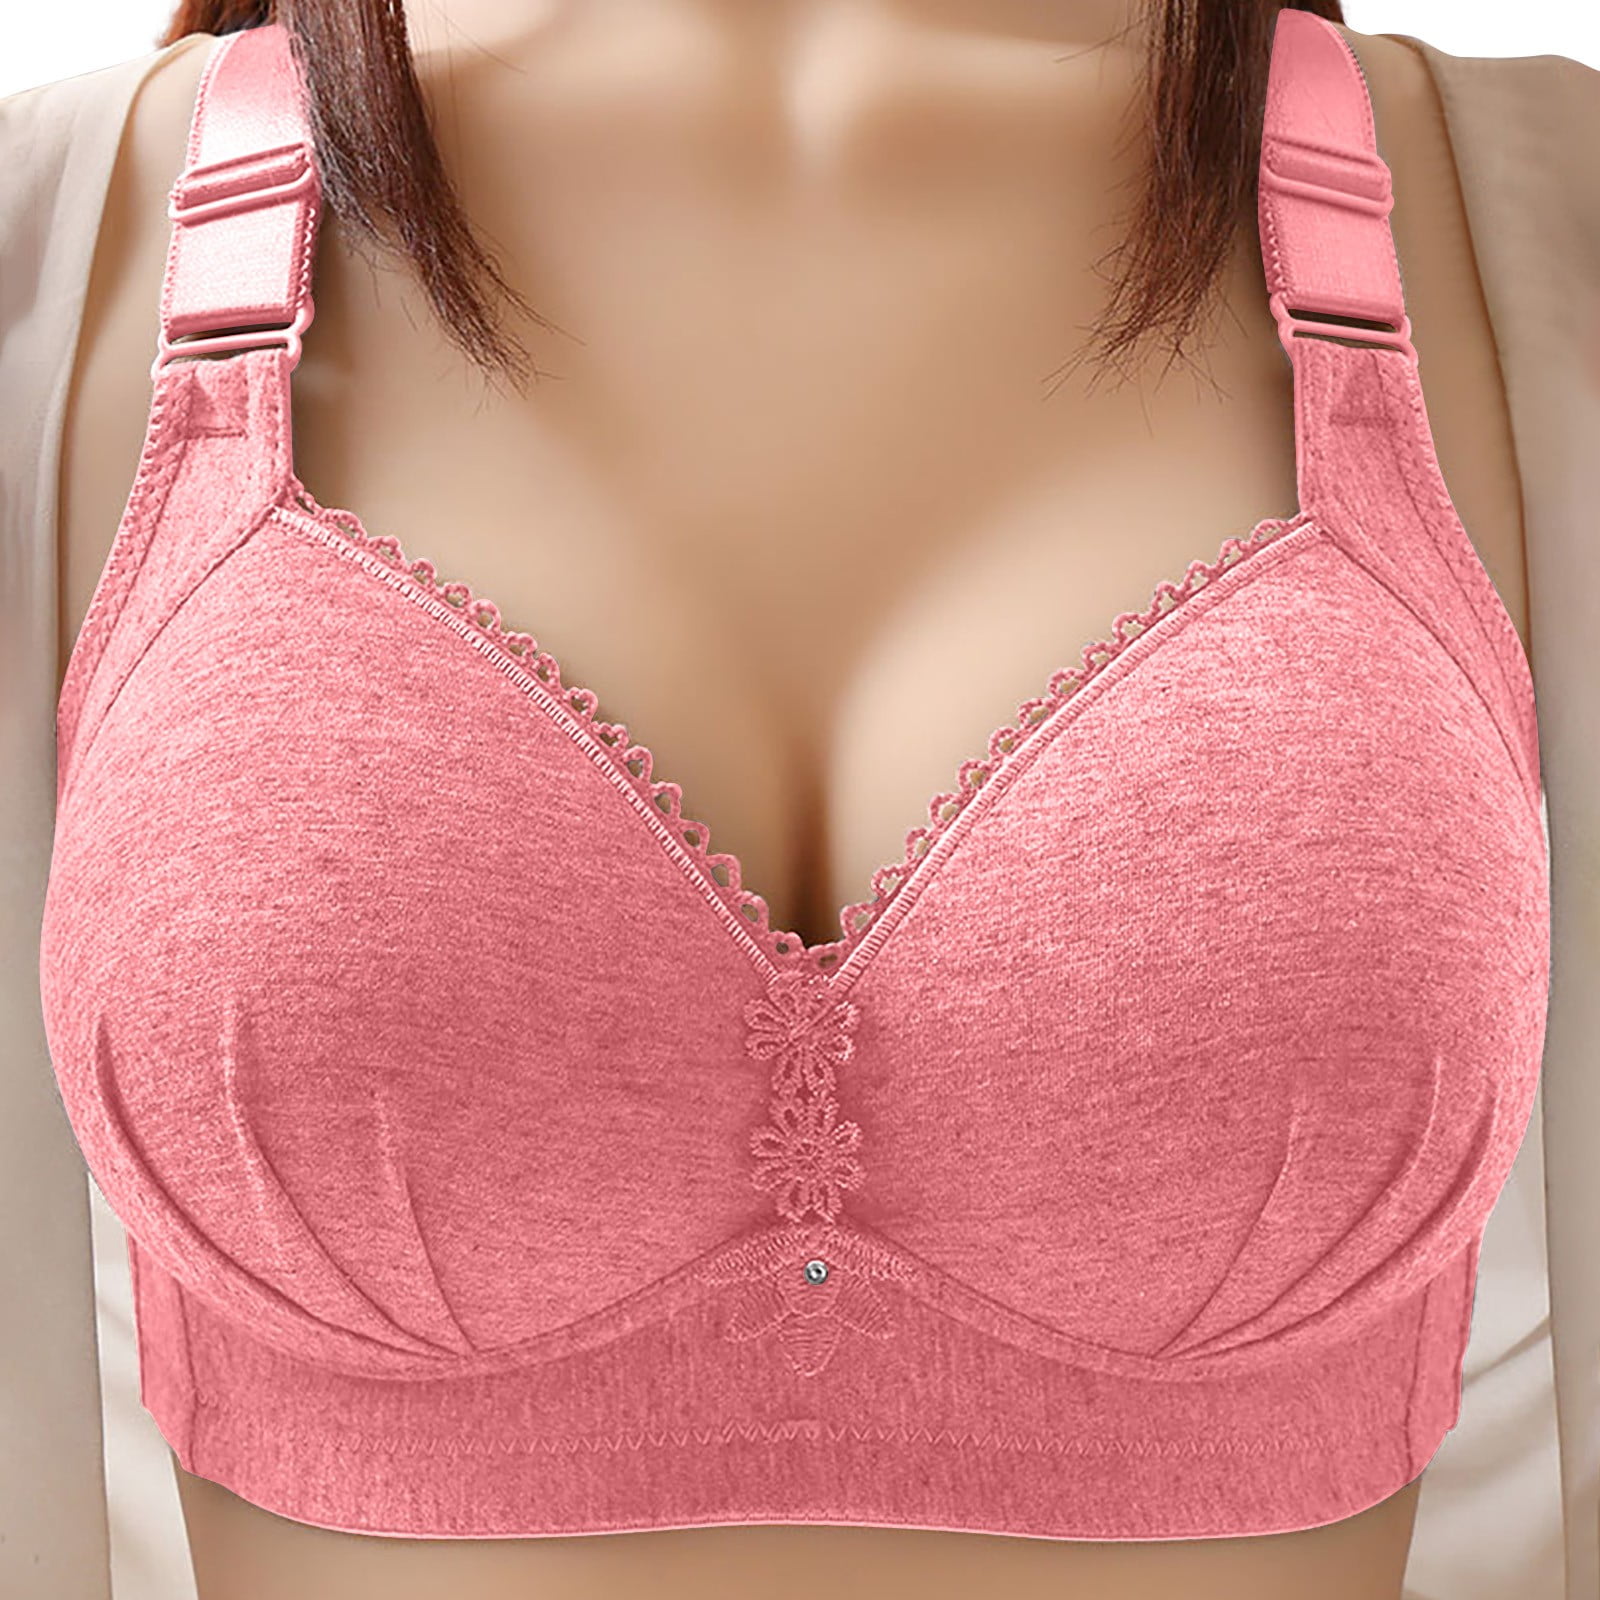 Back Smoothing Bras for Women Button Shapin Adjustable Shoulder Strap  Shapermint Bra for Womens Wirefree Bronze 40